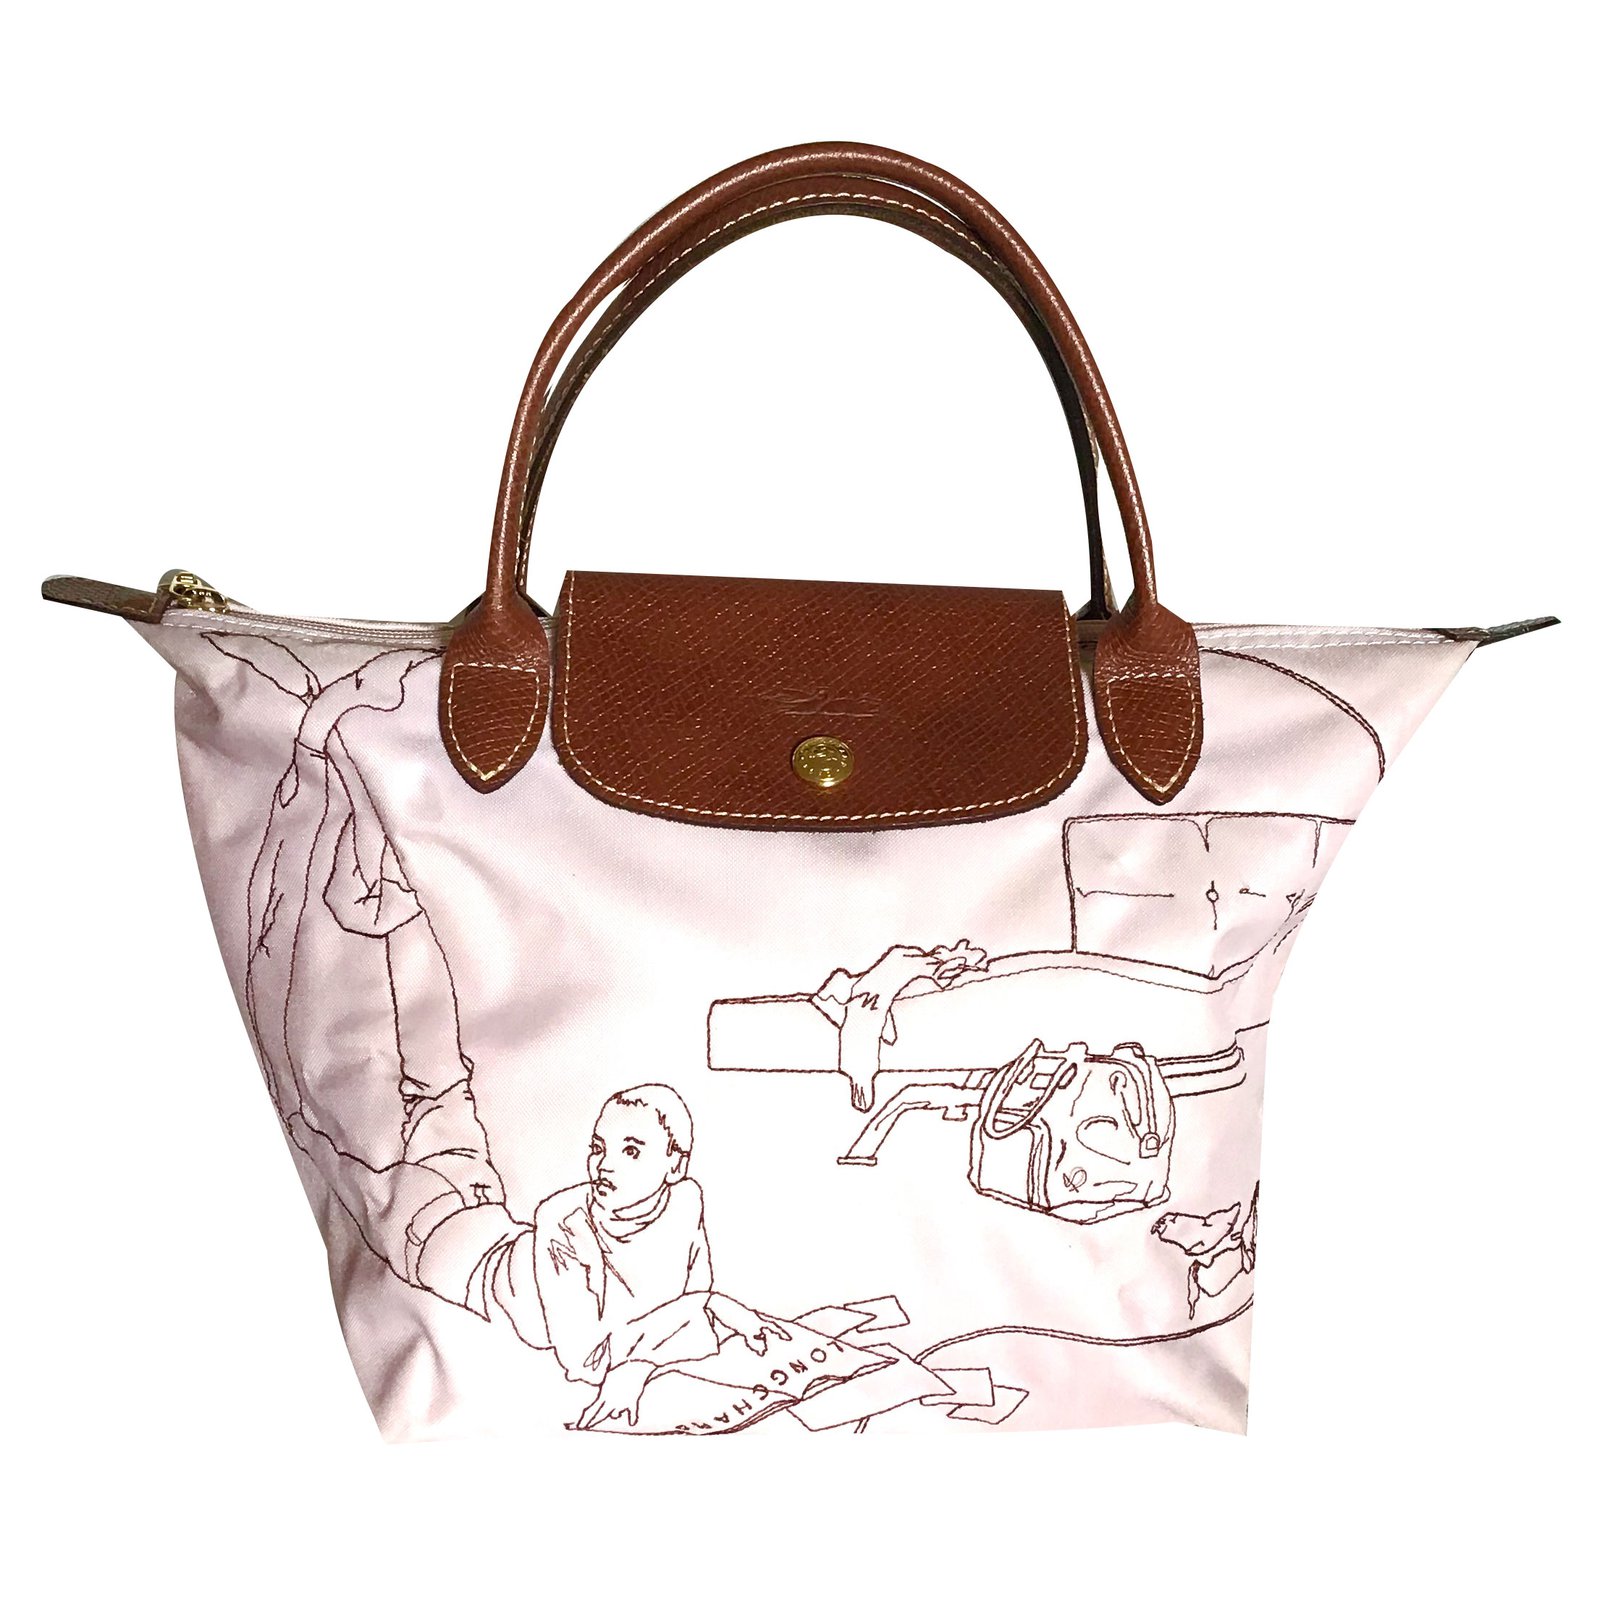 LONGCHAMP Tote bag Leather Handbag Year Of The Ox, Limited Edition. rrp  £350.